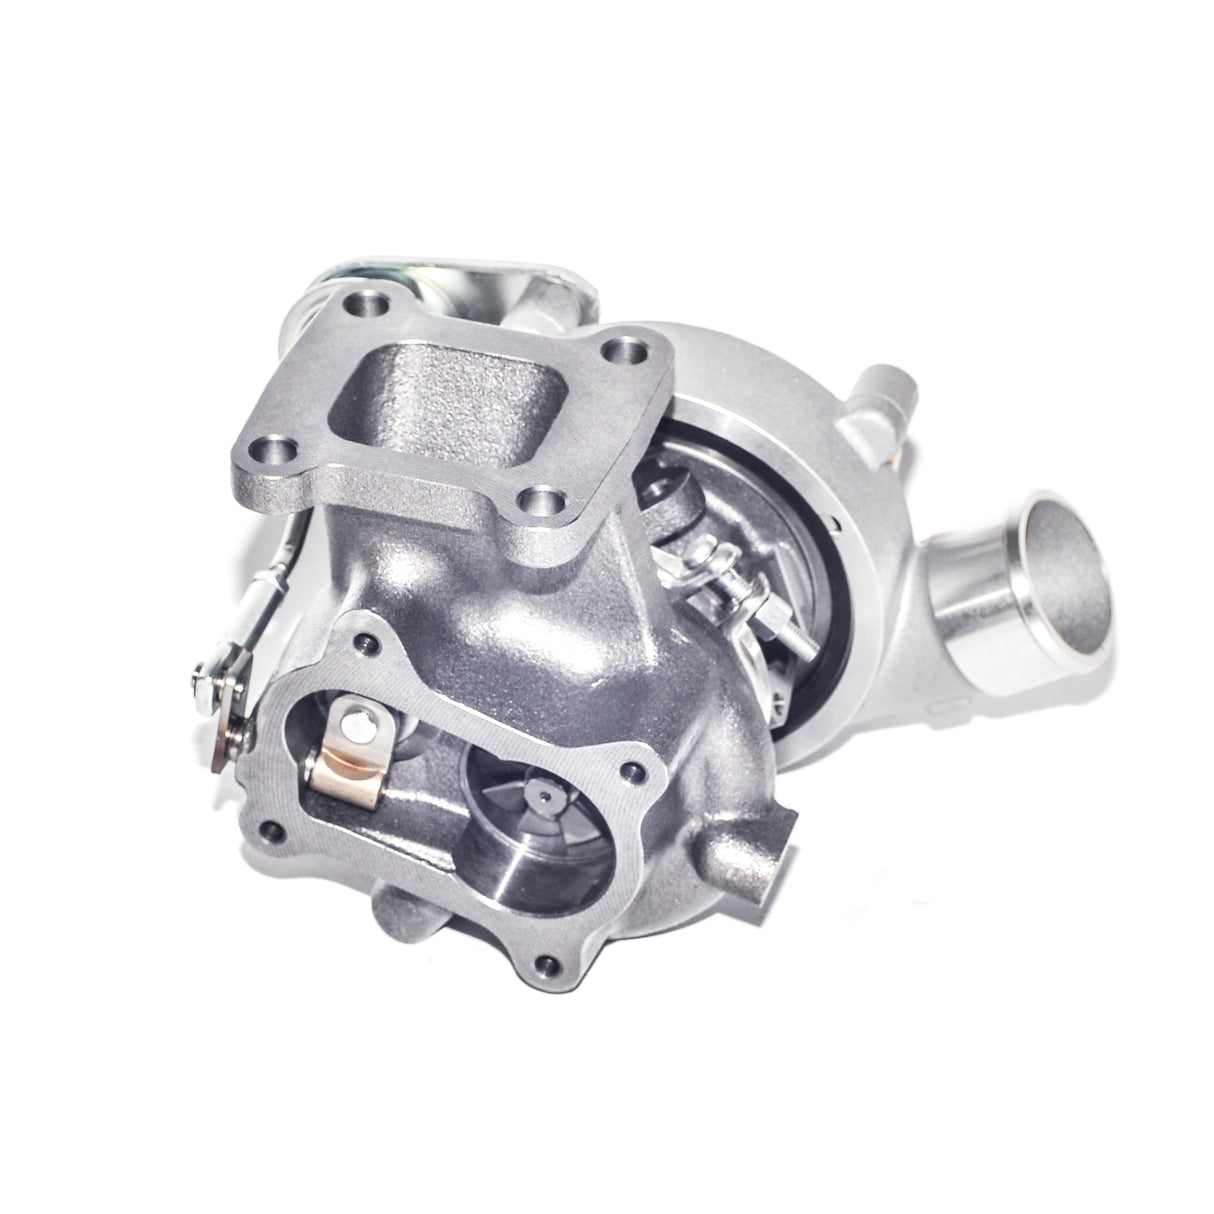 CCT Stage One Upgrade Hi-Flow CT20 Turbo charger To Suit Toyota Hiace / Hilux  / Surf / Landcruiser 2L-T 2.4L